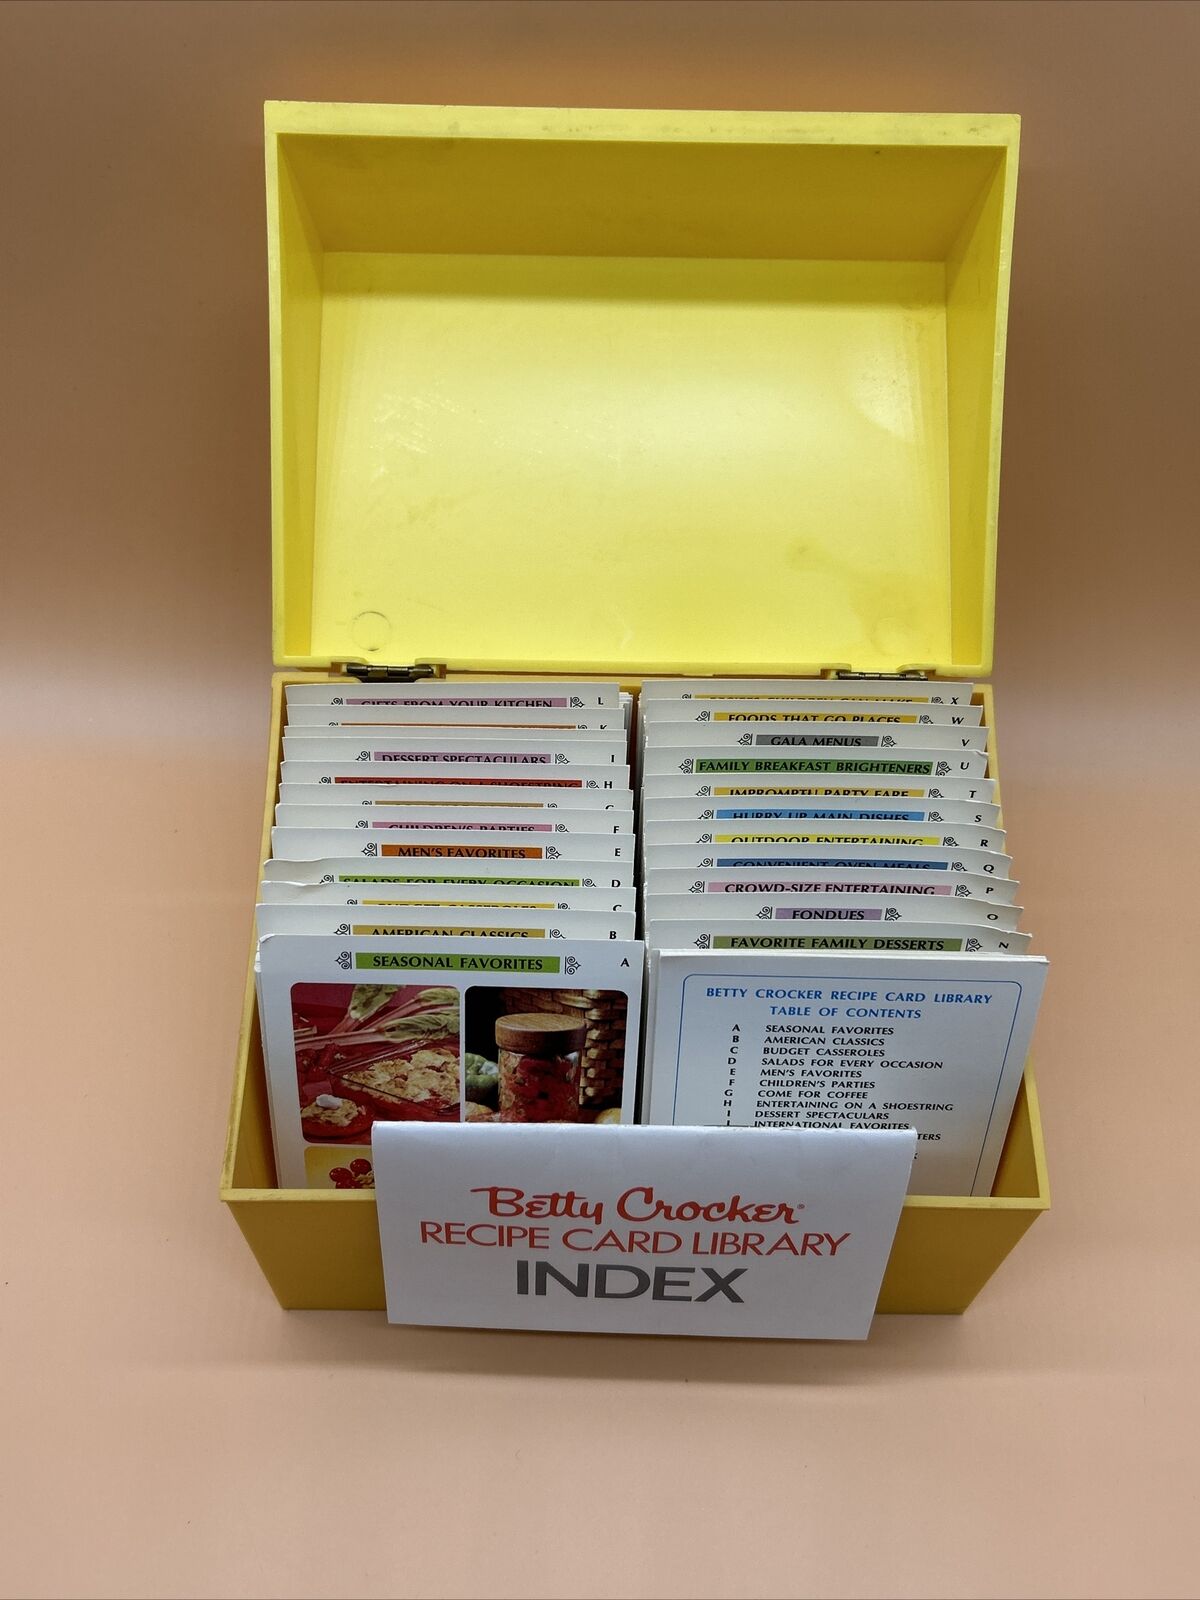 The Betty Crocker Recipe Card Library Vintage 1971 Yellow Box Unsure If Complete